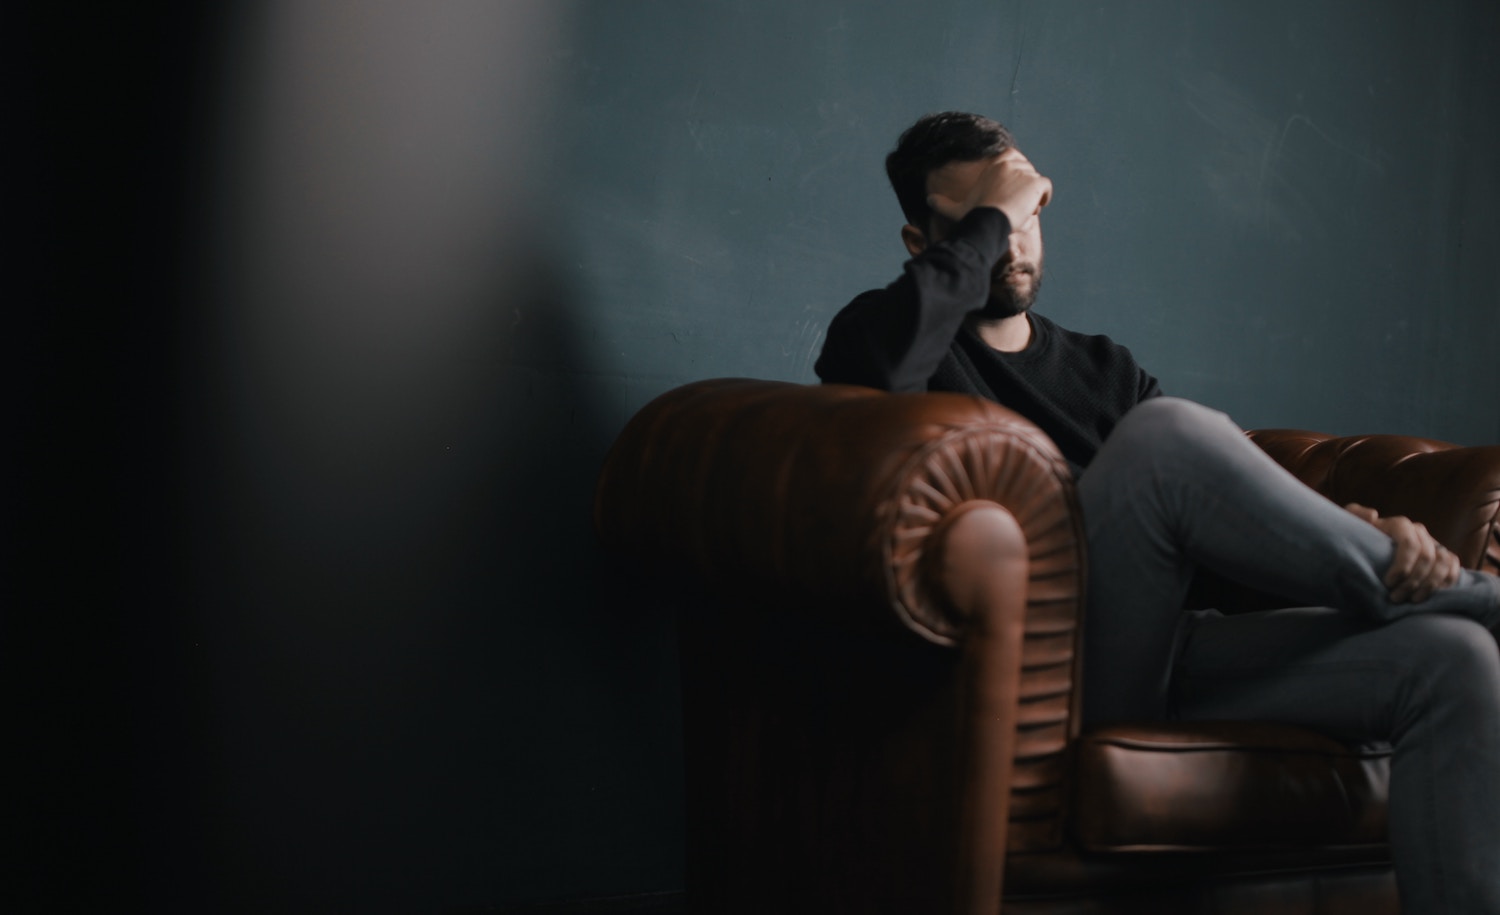 A highly sensitive man, seated, looking tired and dealing with overstimulation and intense emotions, as described in the book "The Highly Sensitive Man" by Tom Falkenstein.